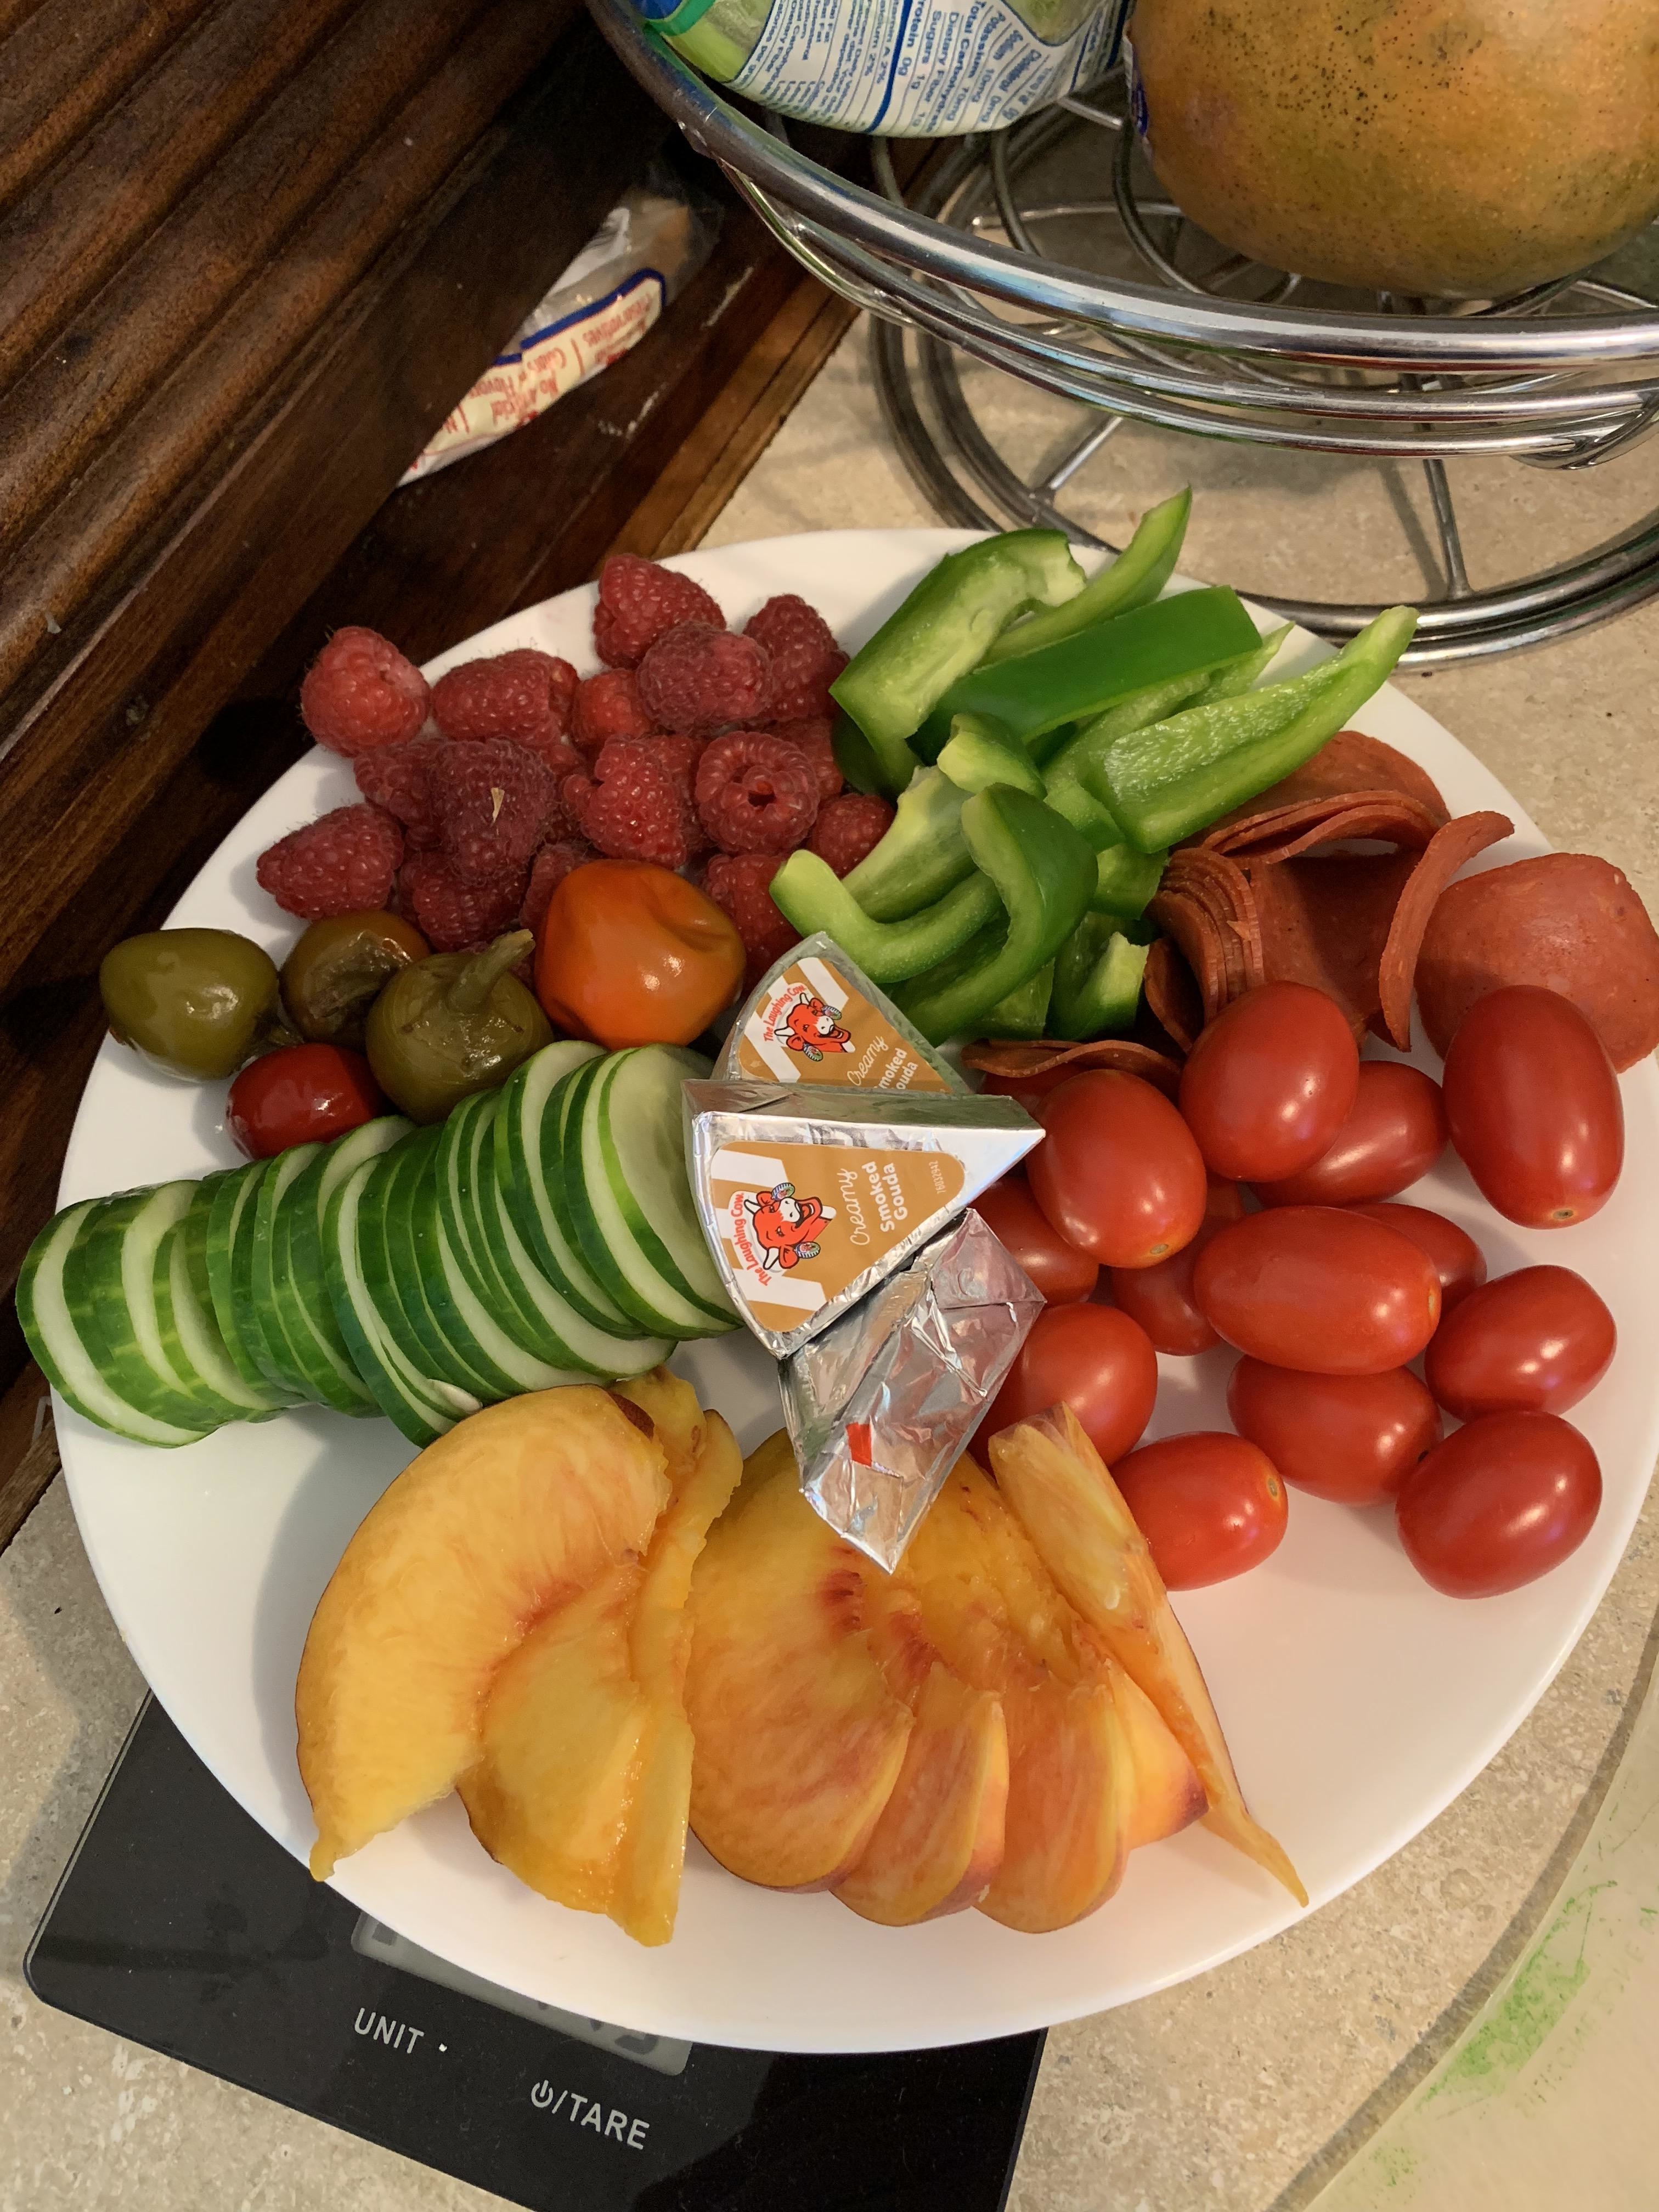 Assorted fresh sliced fruits and vegetables displayed on a plate with a pack of dipping sauce in the center